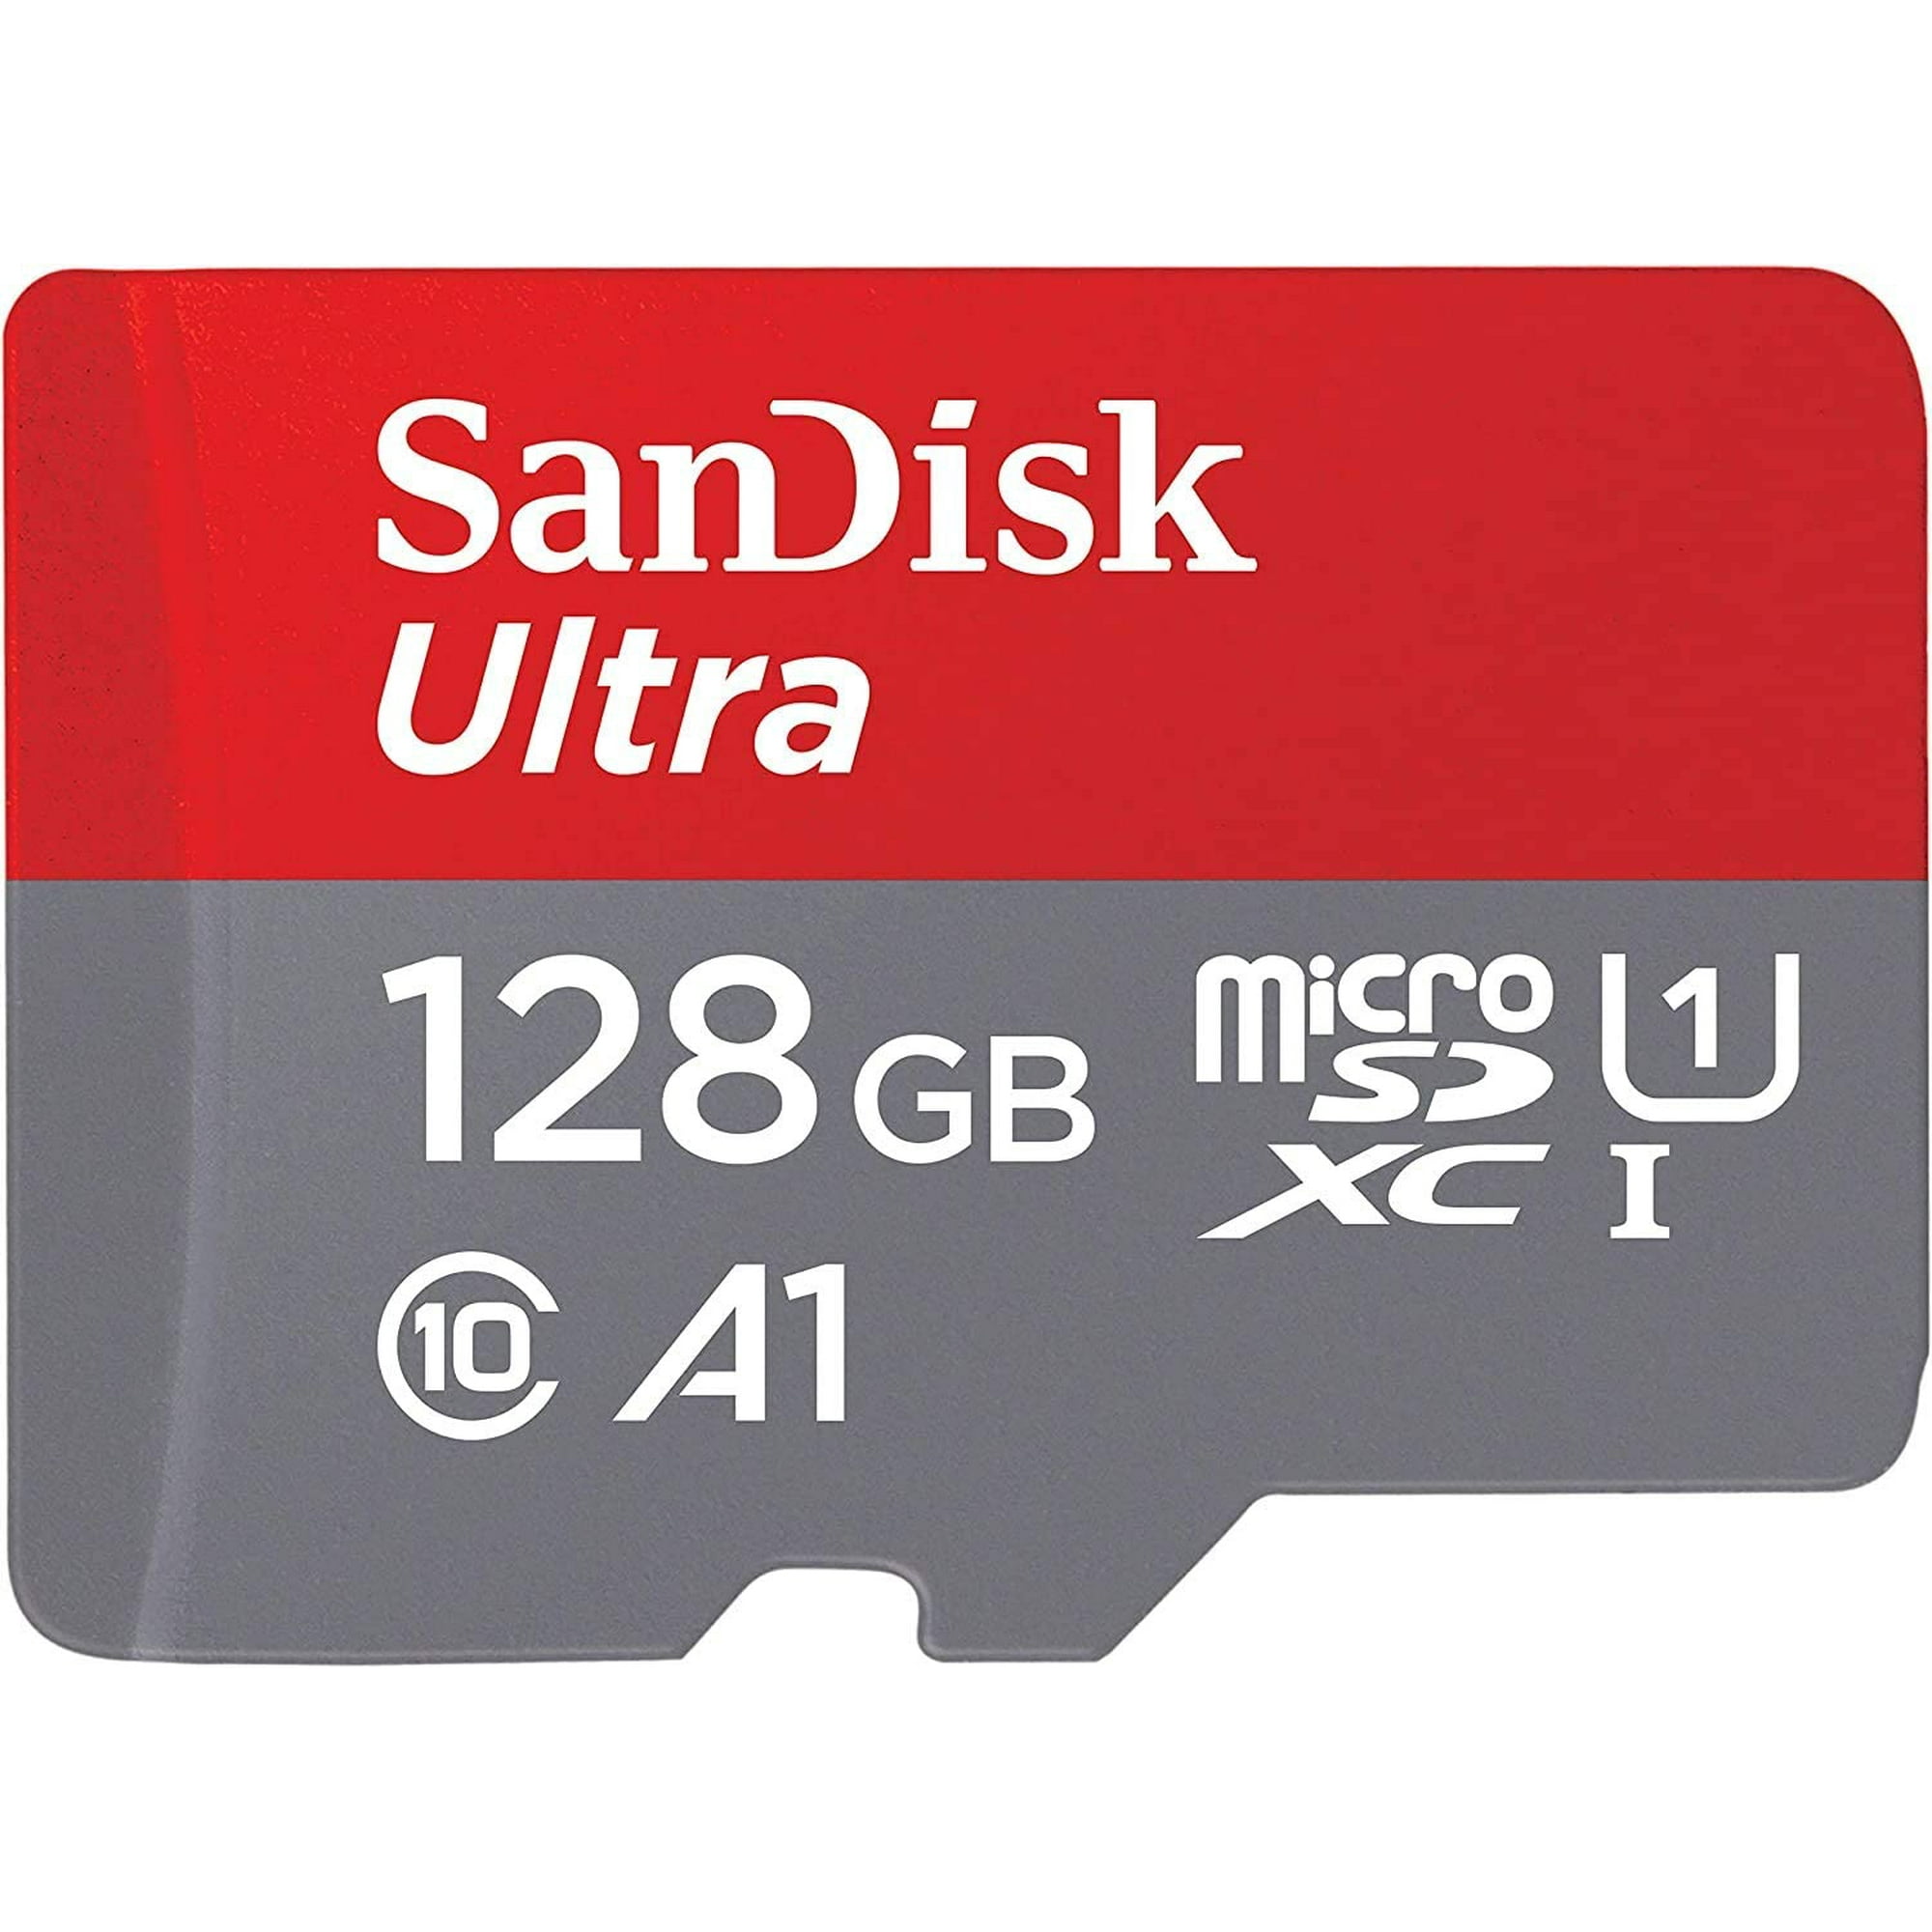 100MBs A1 U1 Works with SanDisk SanDisk Ultra 128GB MicroSDXC Verified for Alcatel 1 by SanFlash 